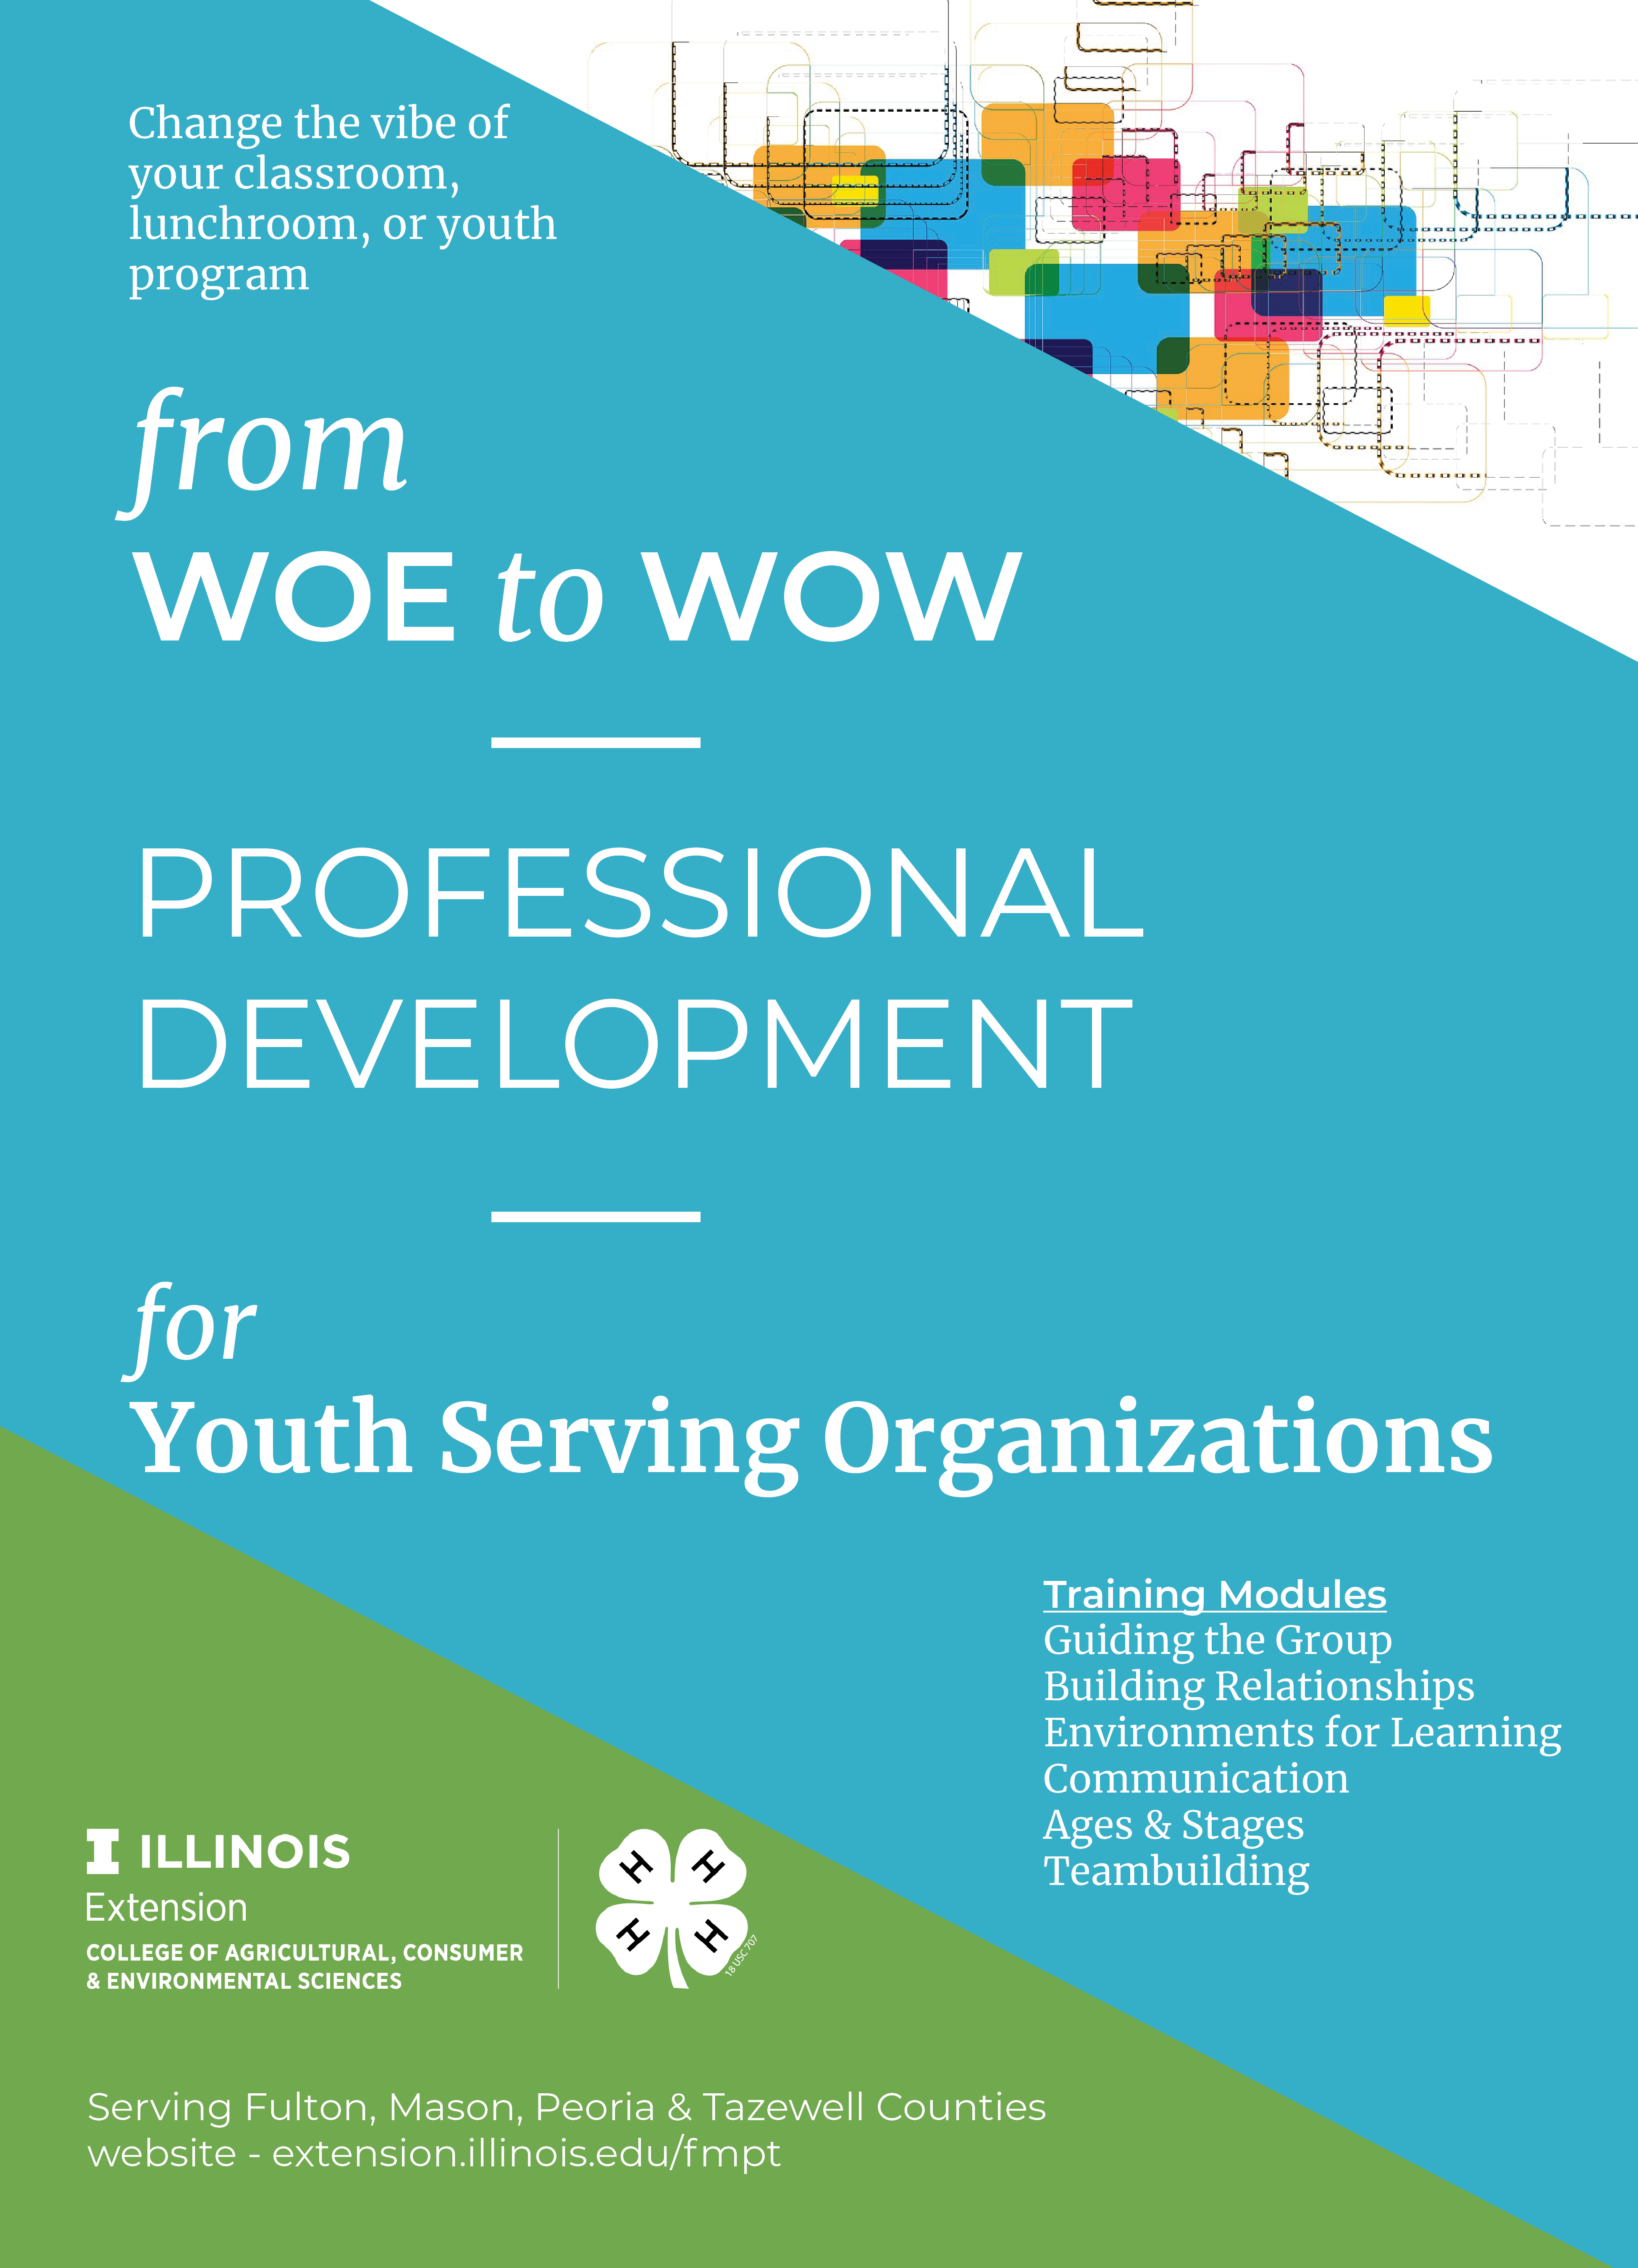 info graphic for Woe to Wow Professional Development